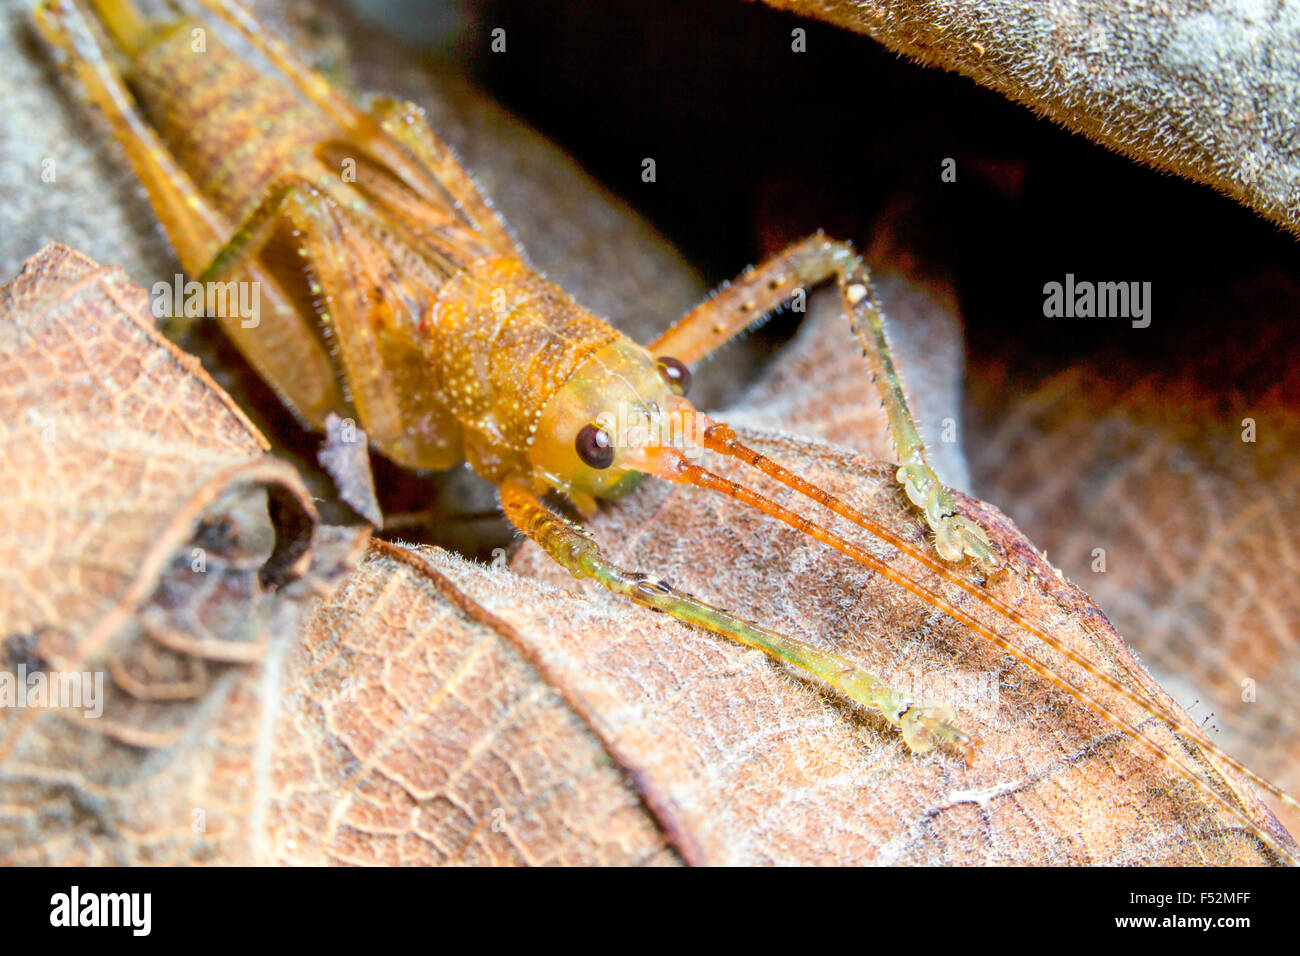 The Family Tettigoniidae Known As Bush Crickets Contains More Than 6 400 Species It Is Part Of The Suborder Ensifera And The Only Family In The Superf Stock Photo